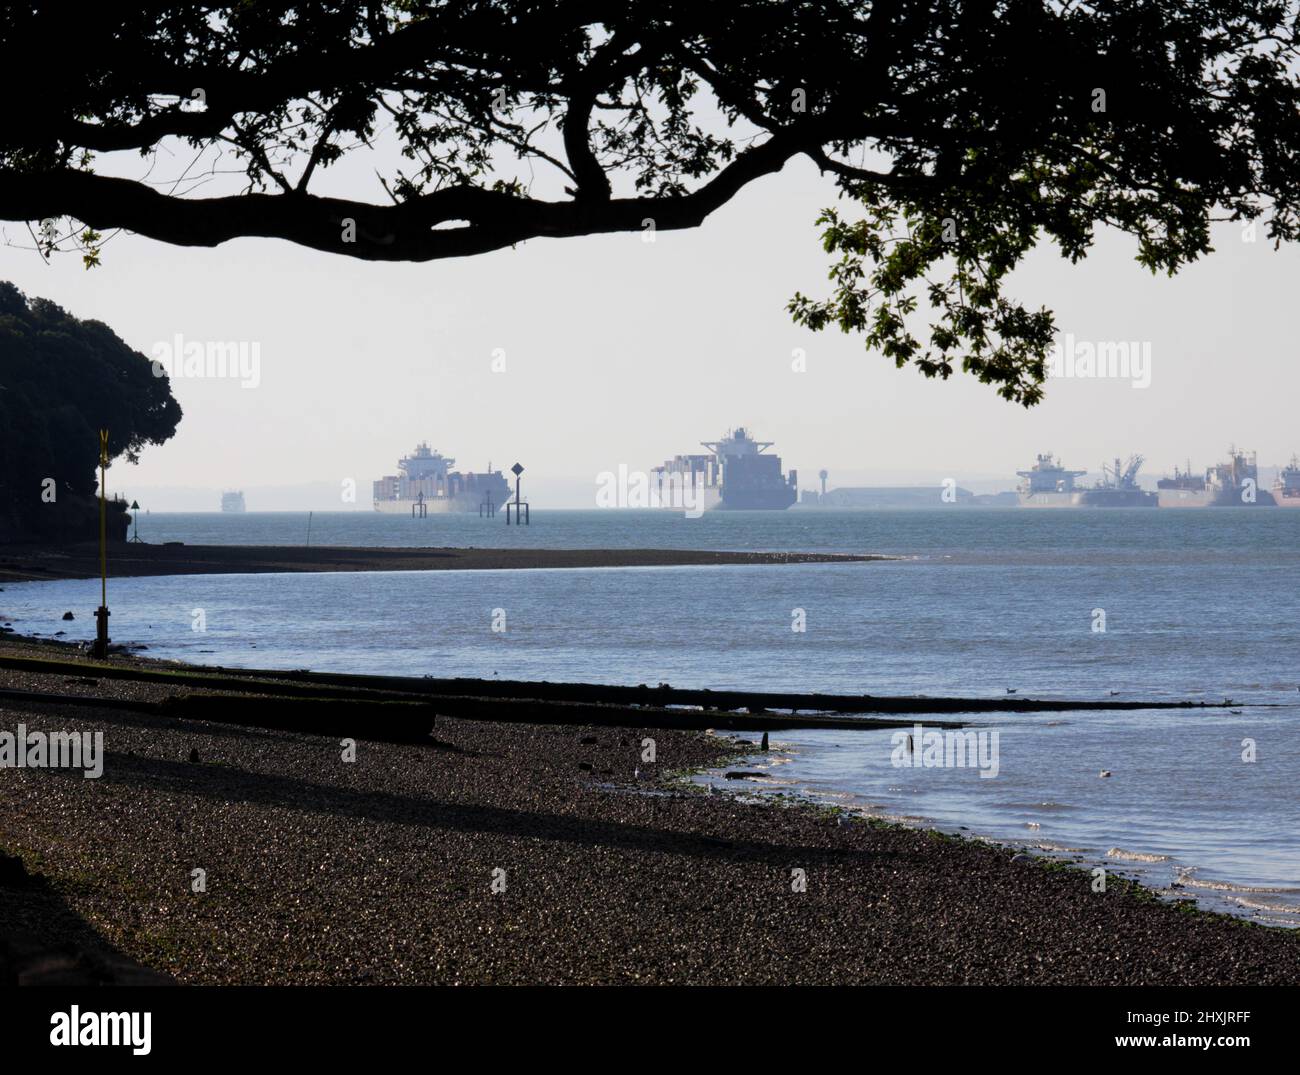 Oil tankers and container ships come and go at the entrance to Southampton Water and the Solent. Seen from Netley. Stock Photo